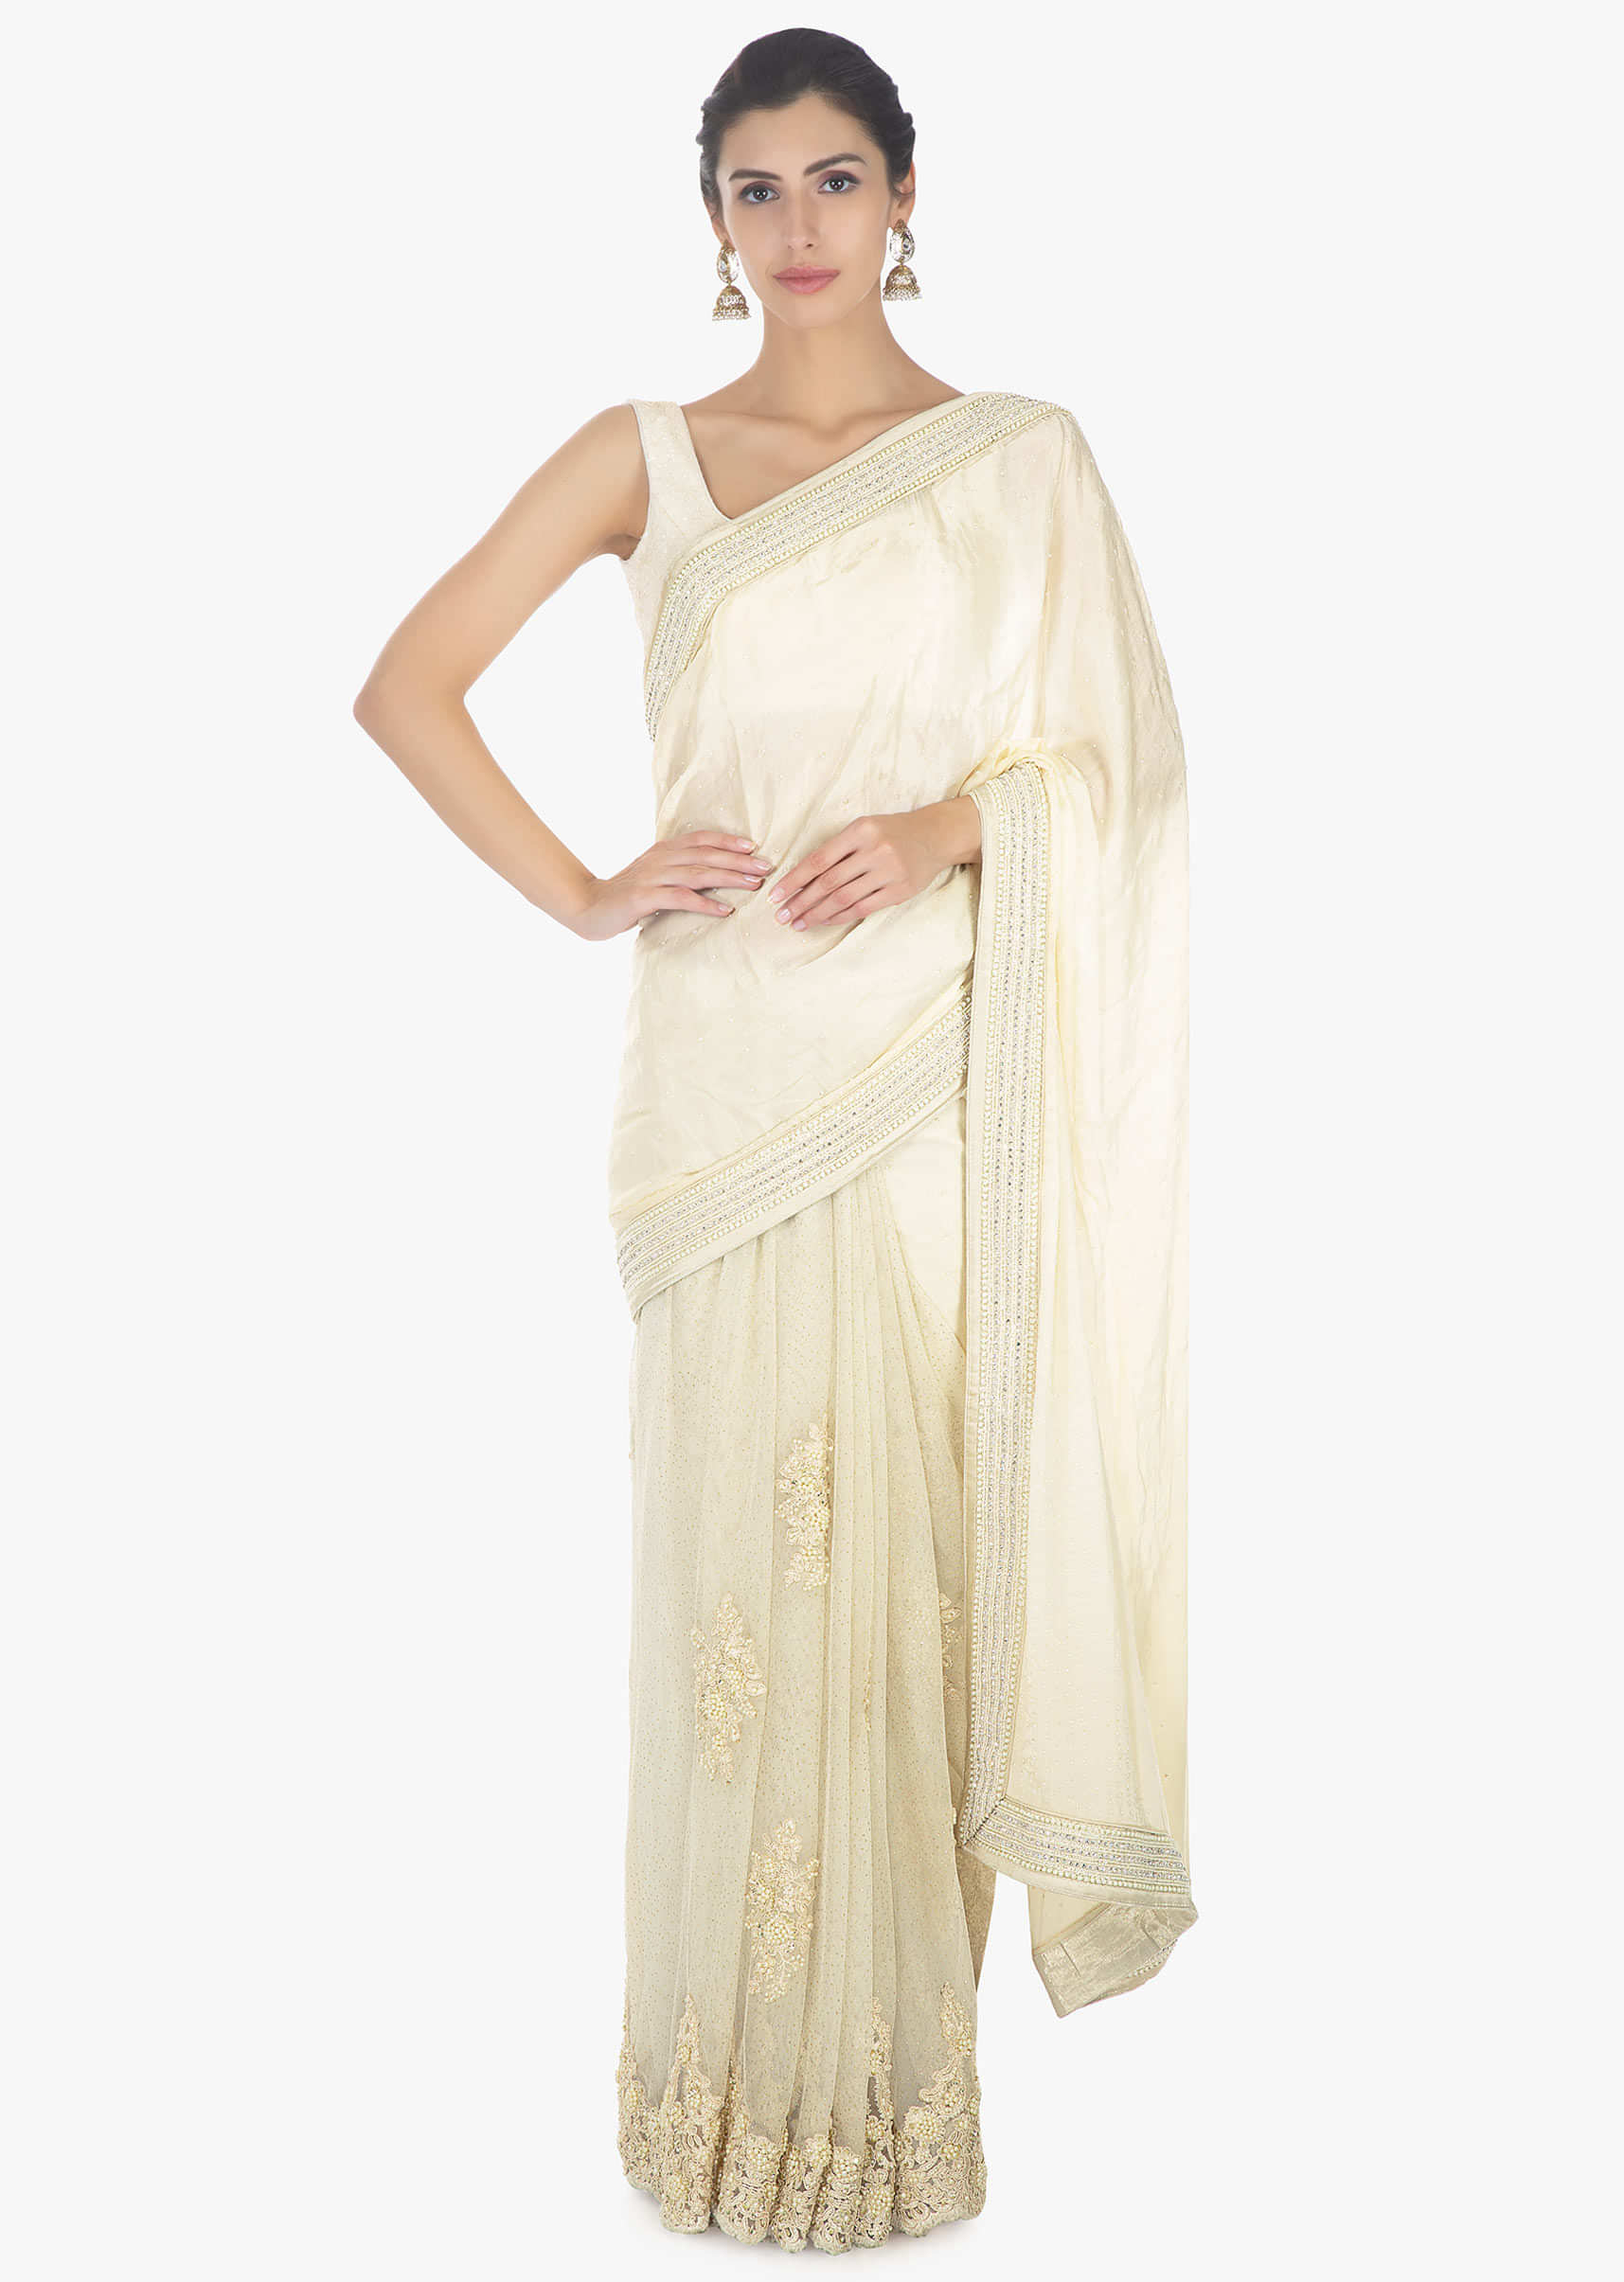 Off white half and half saree in chiffon and net saree with embellished scallop border 